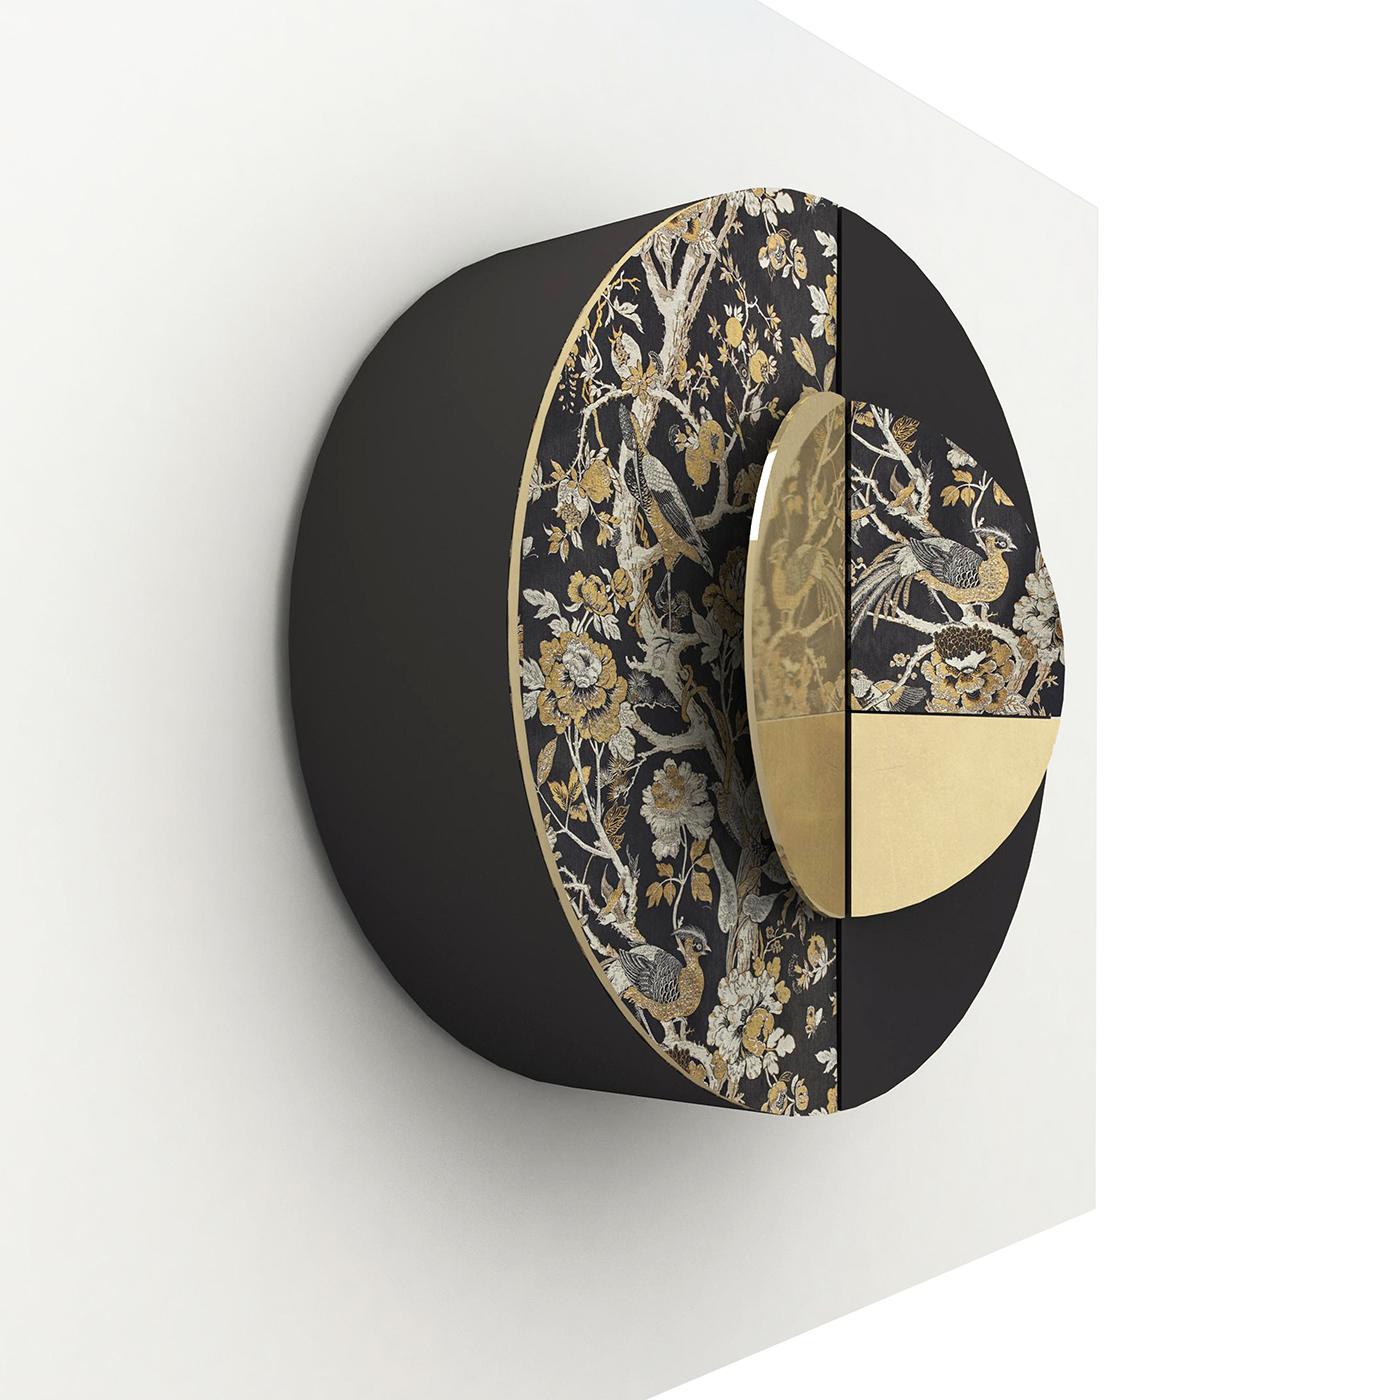 Named after the renowned Chinese screen of the XVII and XVIII century, this piece is a sculptural objet d'art that functions as wall cabinet. Boasting a black and white color palette, its round wooden structure is partially upholstered with a